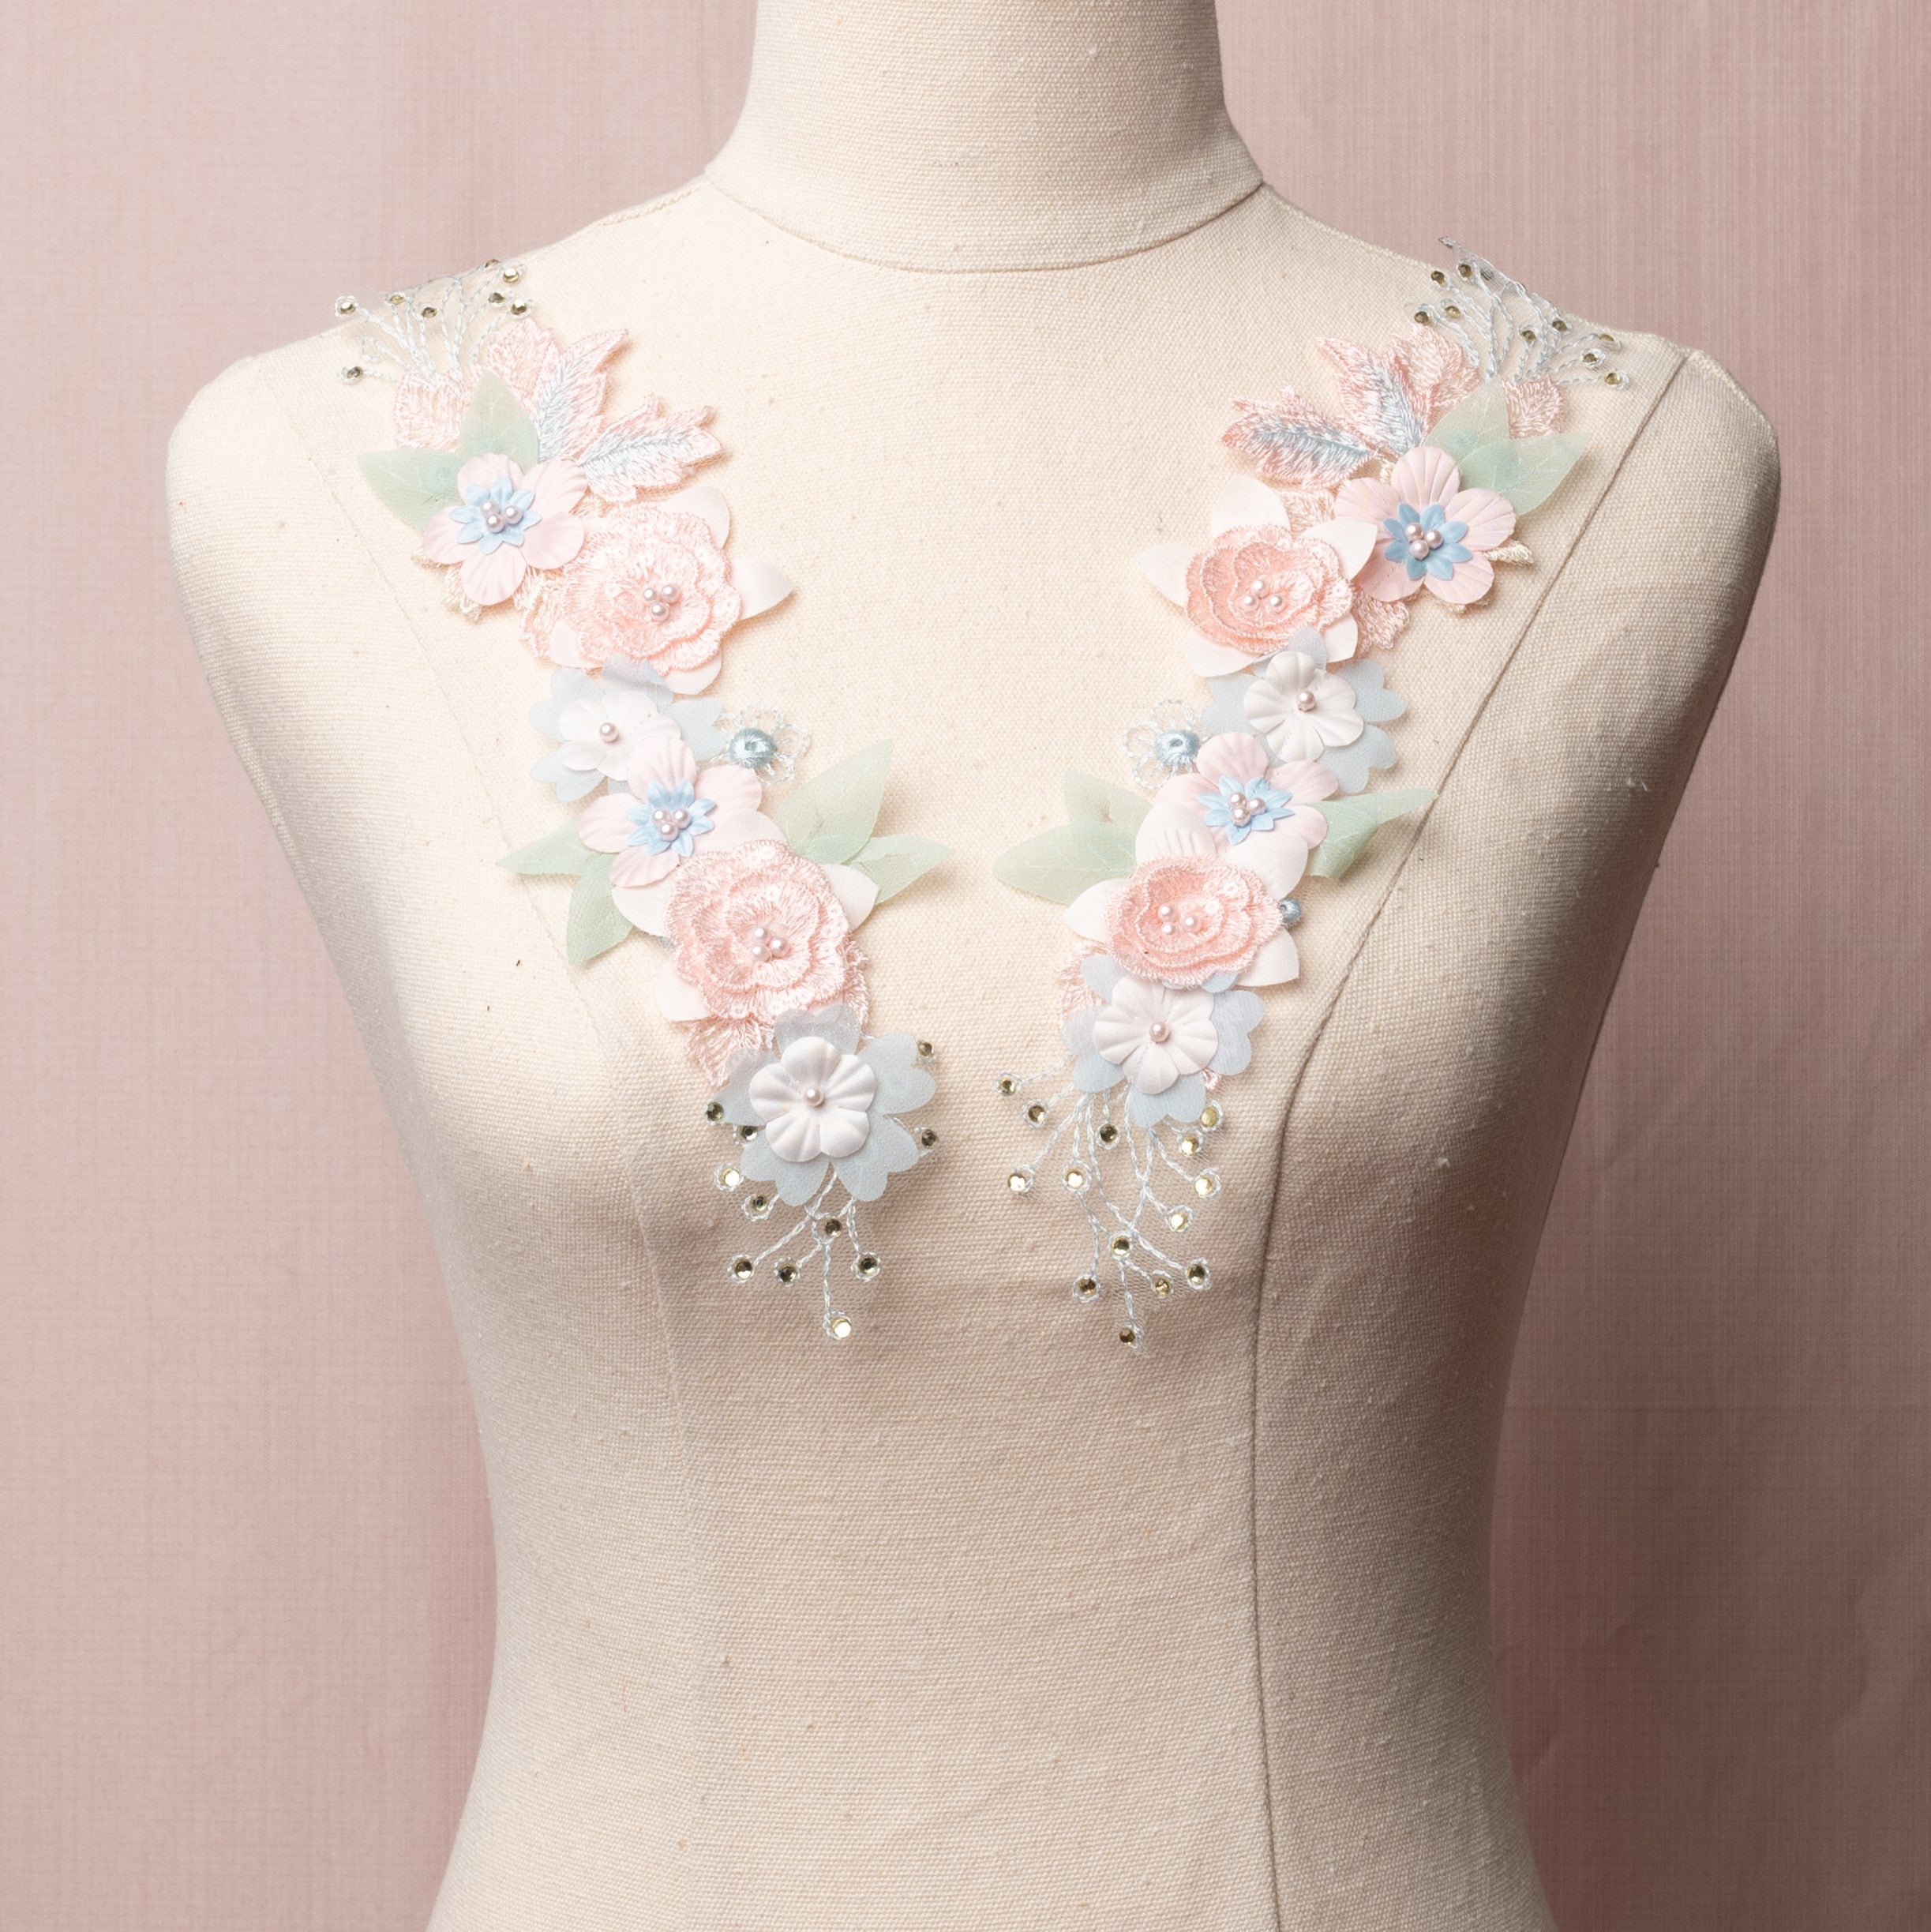 Pink, blue and sage green floral applique displayed on a mannequin.  The applique is decorated with gems and pearls.